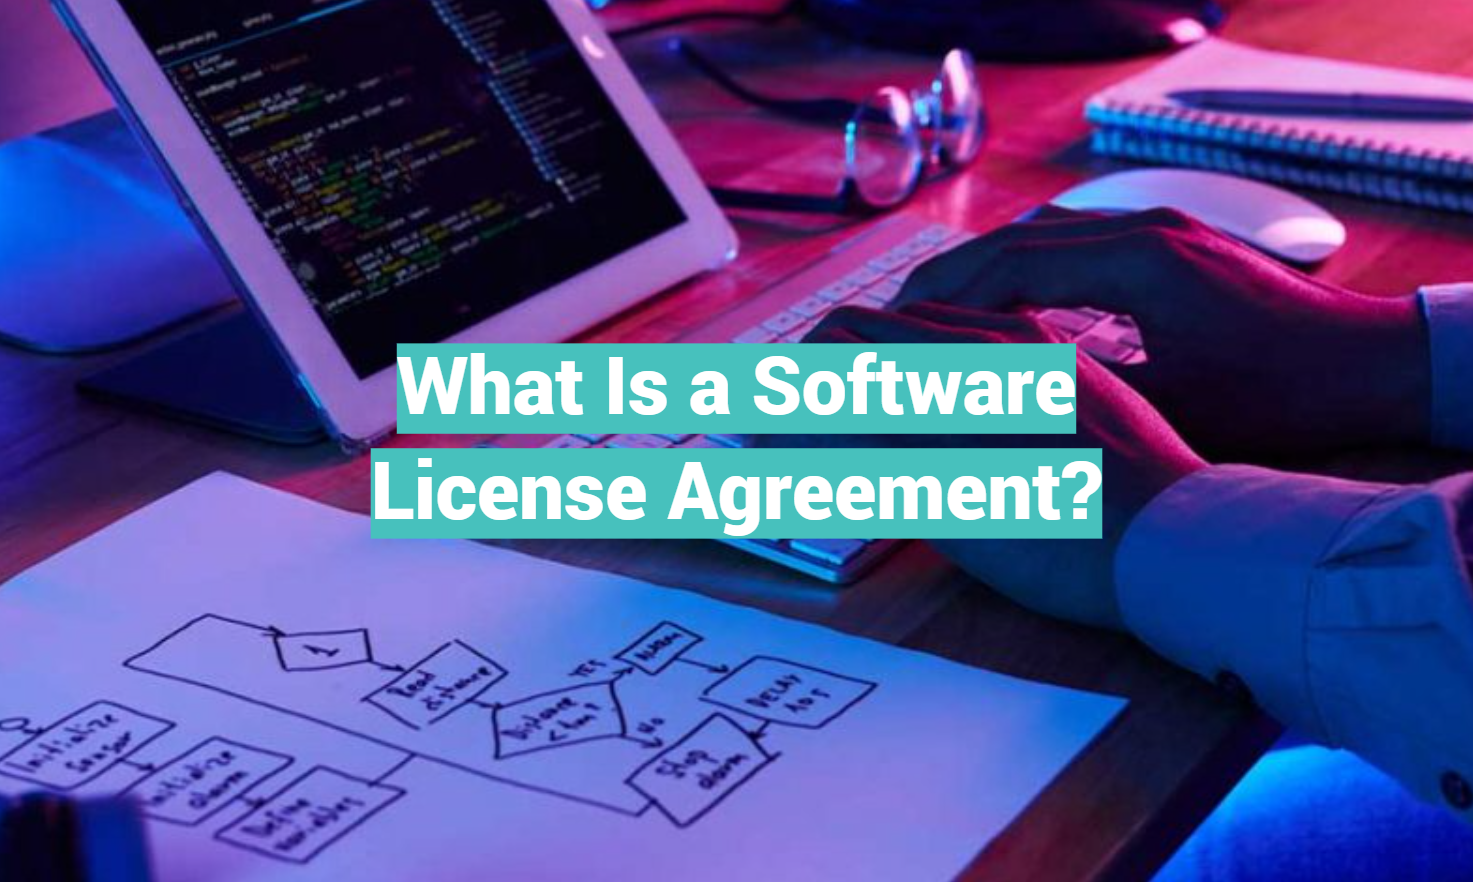 What Is a Software License Agreement?